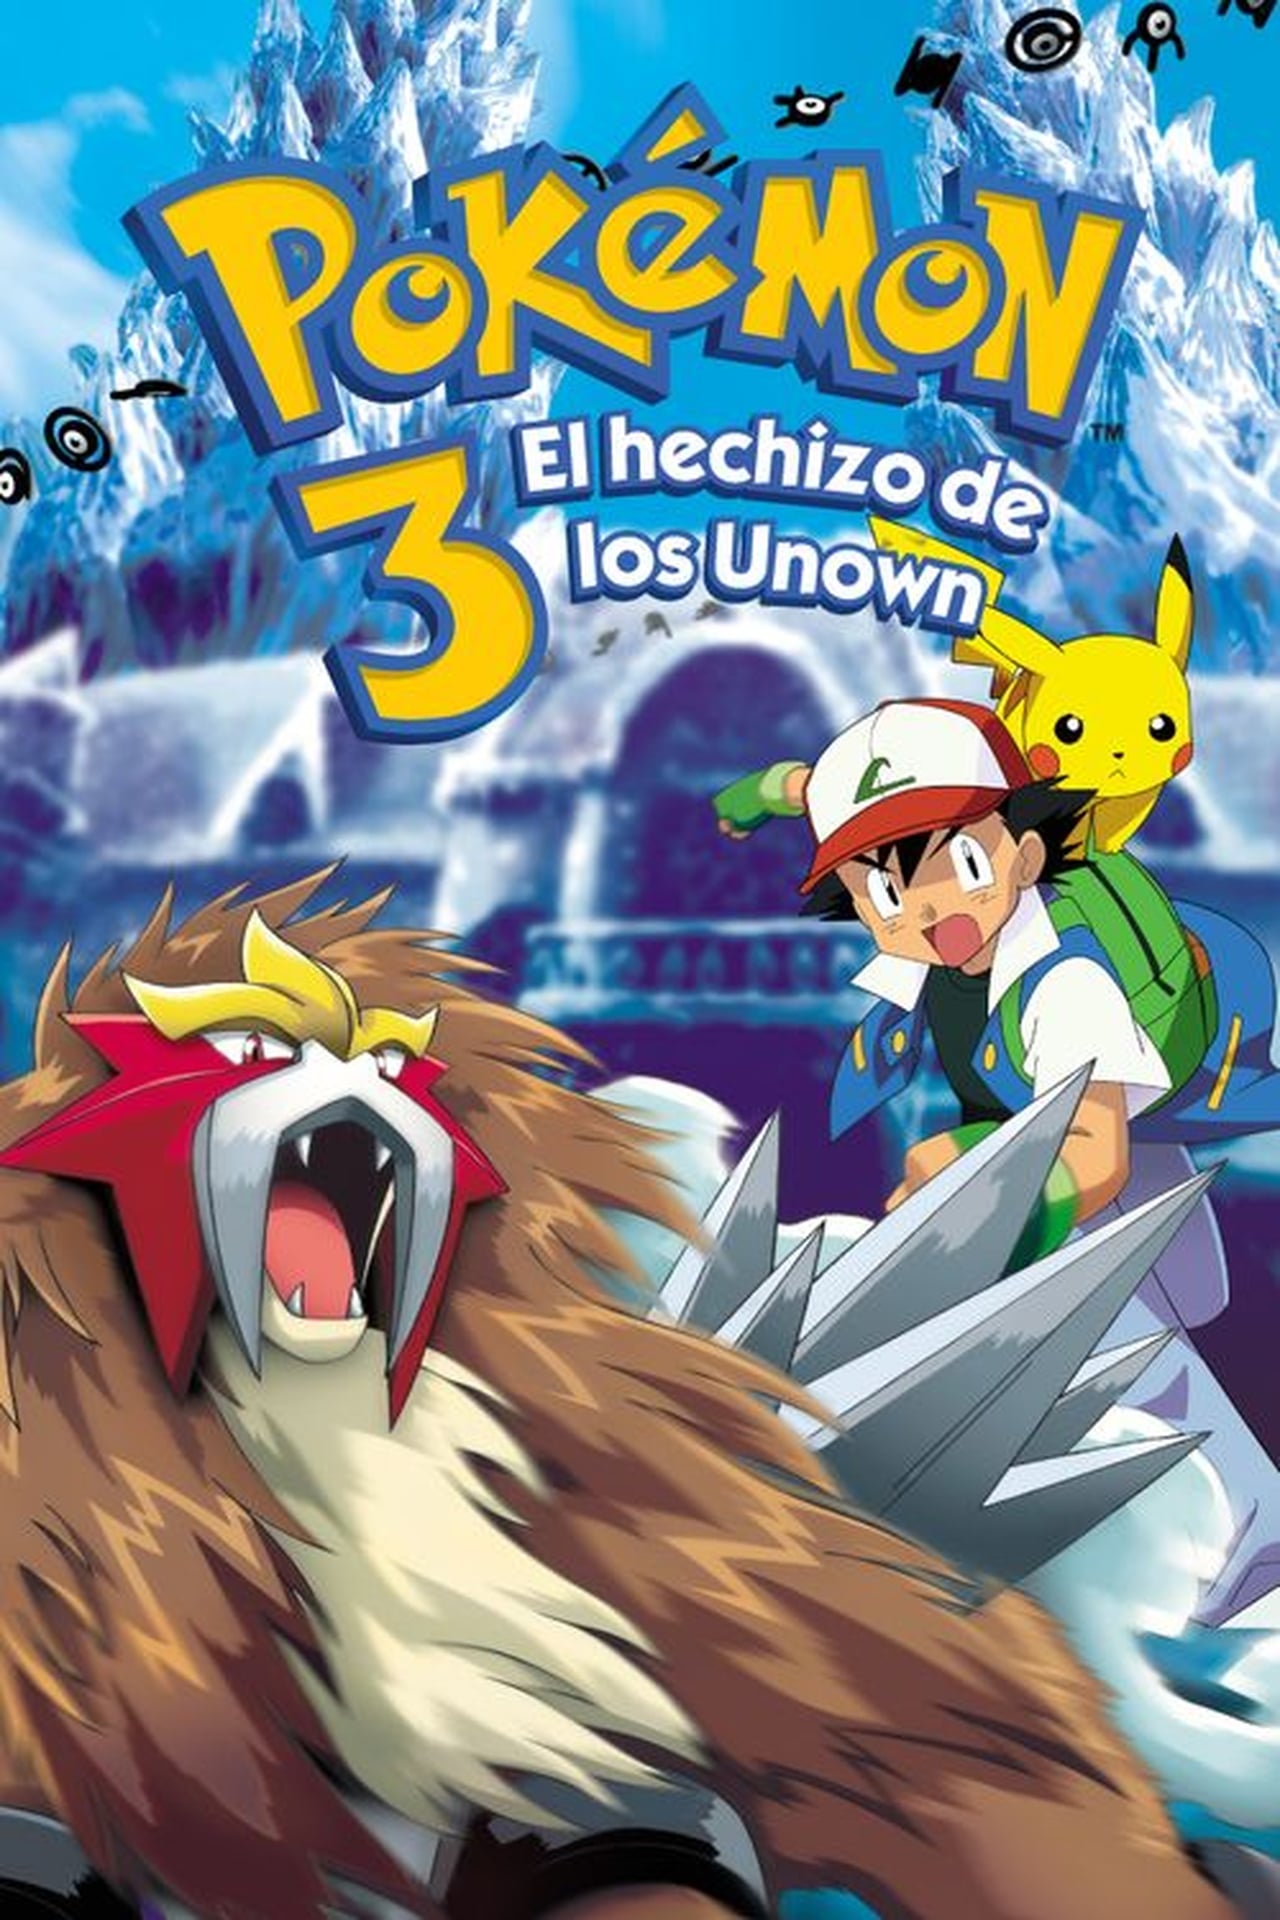 pokemon movie 3 spell of the unknown download